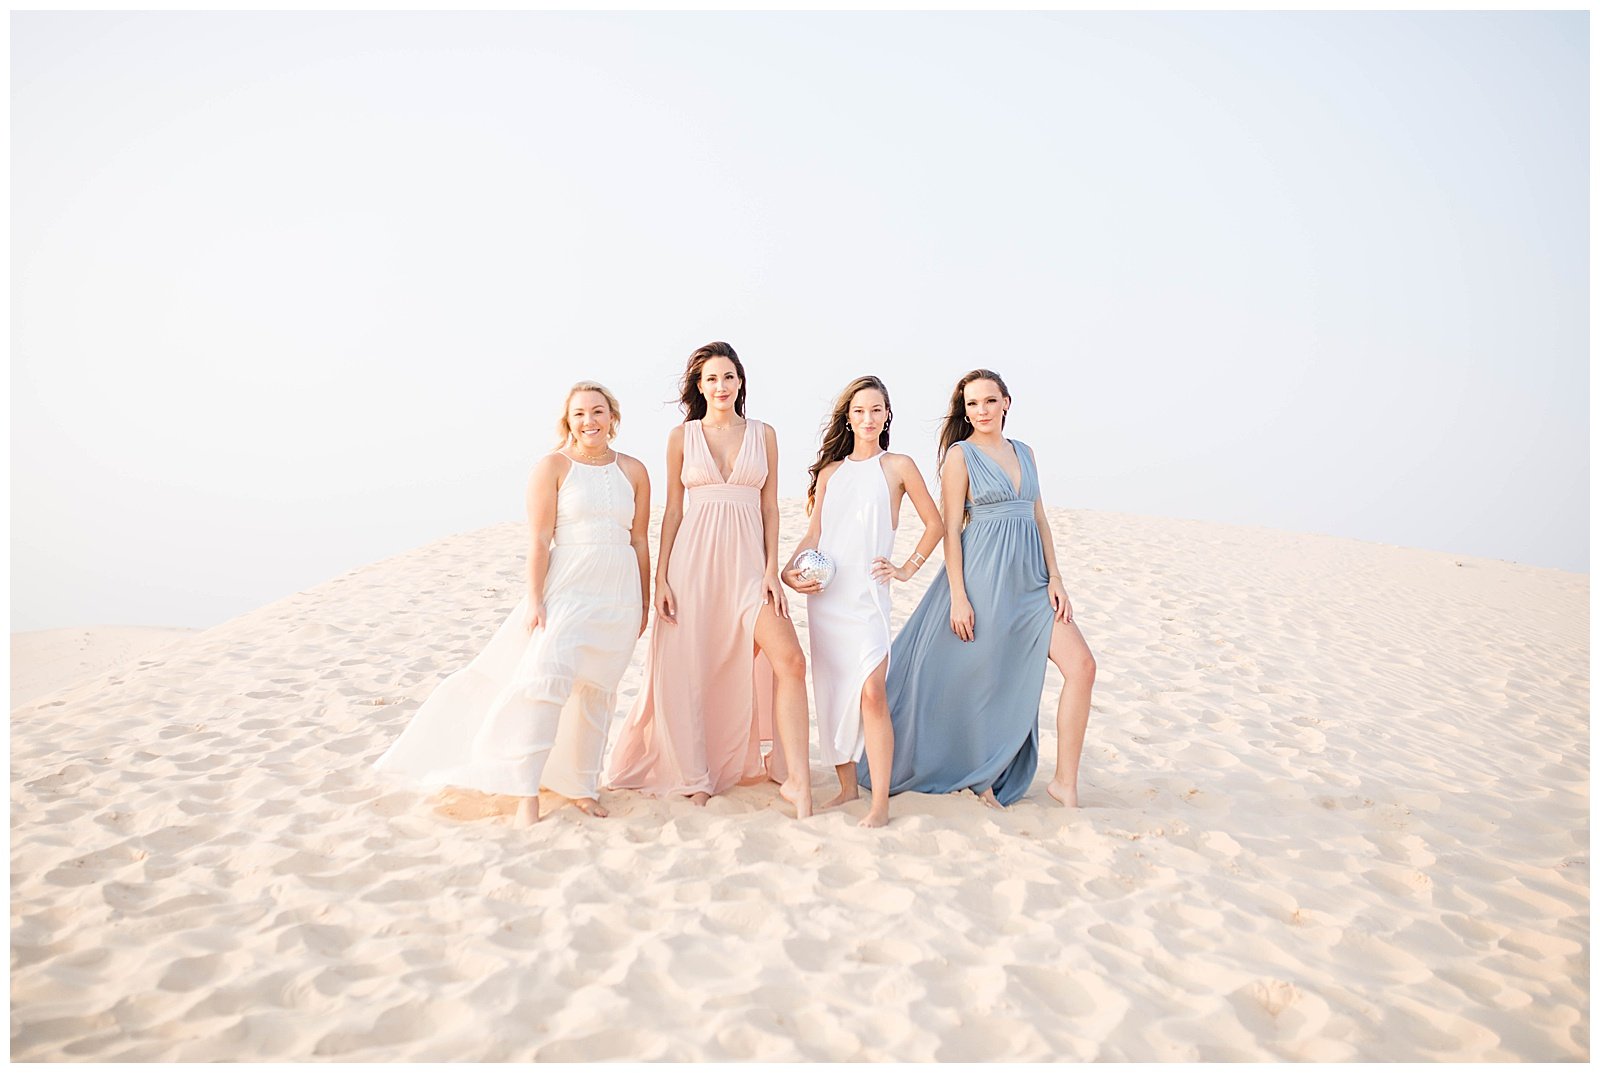 Four girls in pastel dresses posing at the sand dunes